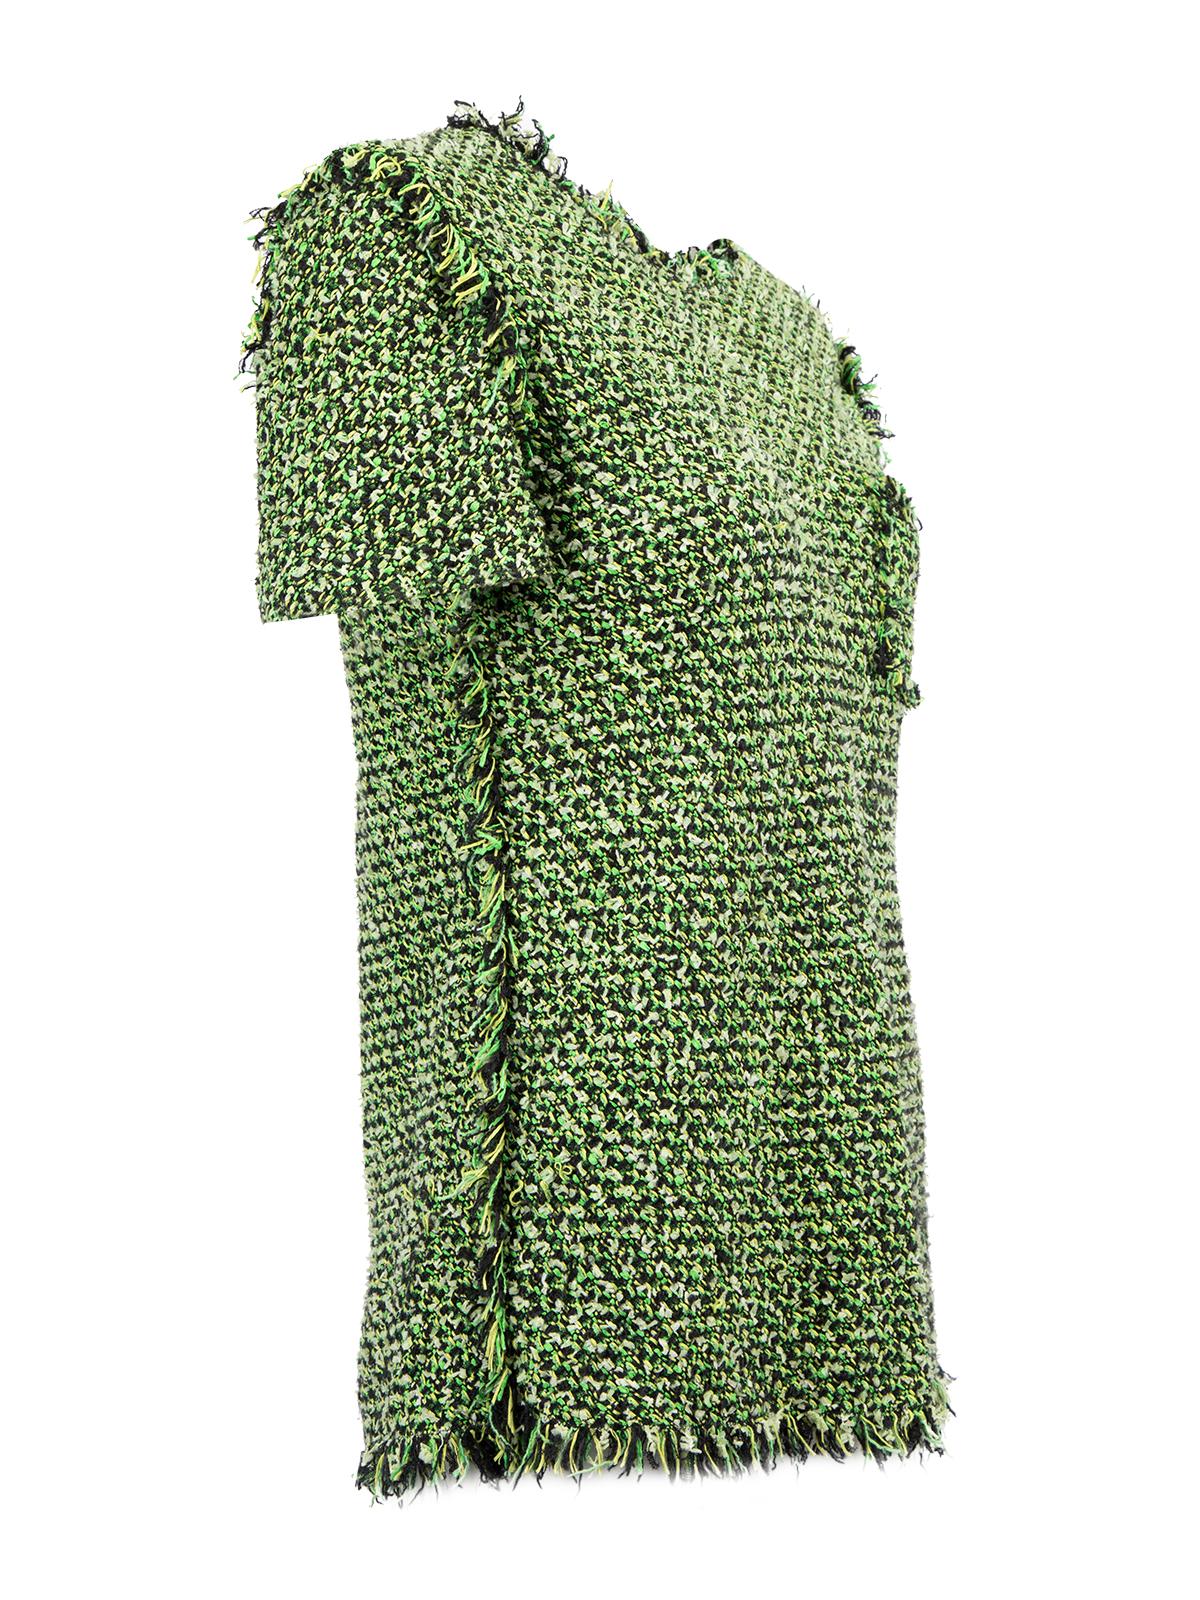 CONDITION is Very good. Minimal wear to top is evident. Minimal loose threads on this used Lanvin designer resale item. Details Green Tweed Top Short sleeves Round neckline Pocket on chest Zip fastening on shoulder Frill detail Made in France